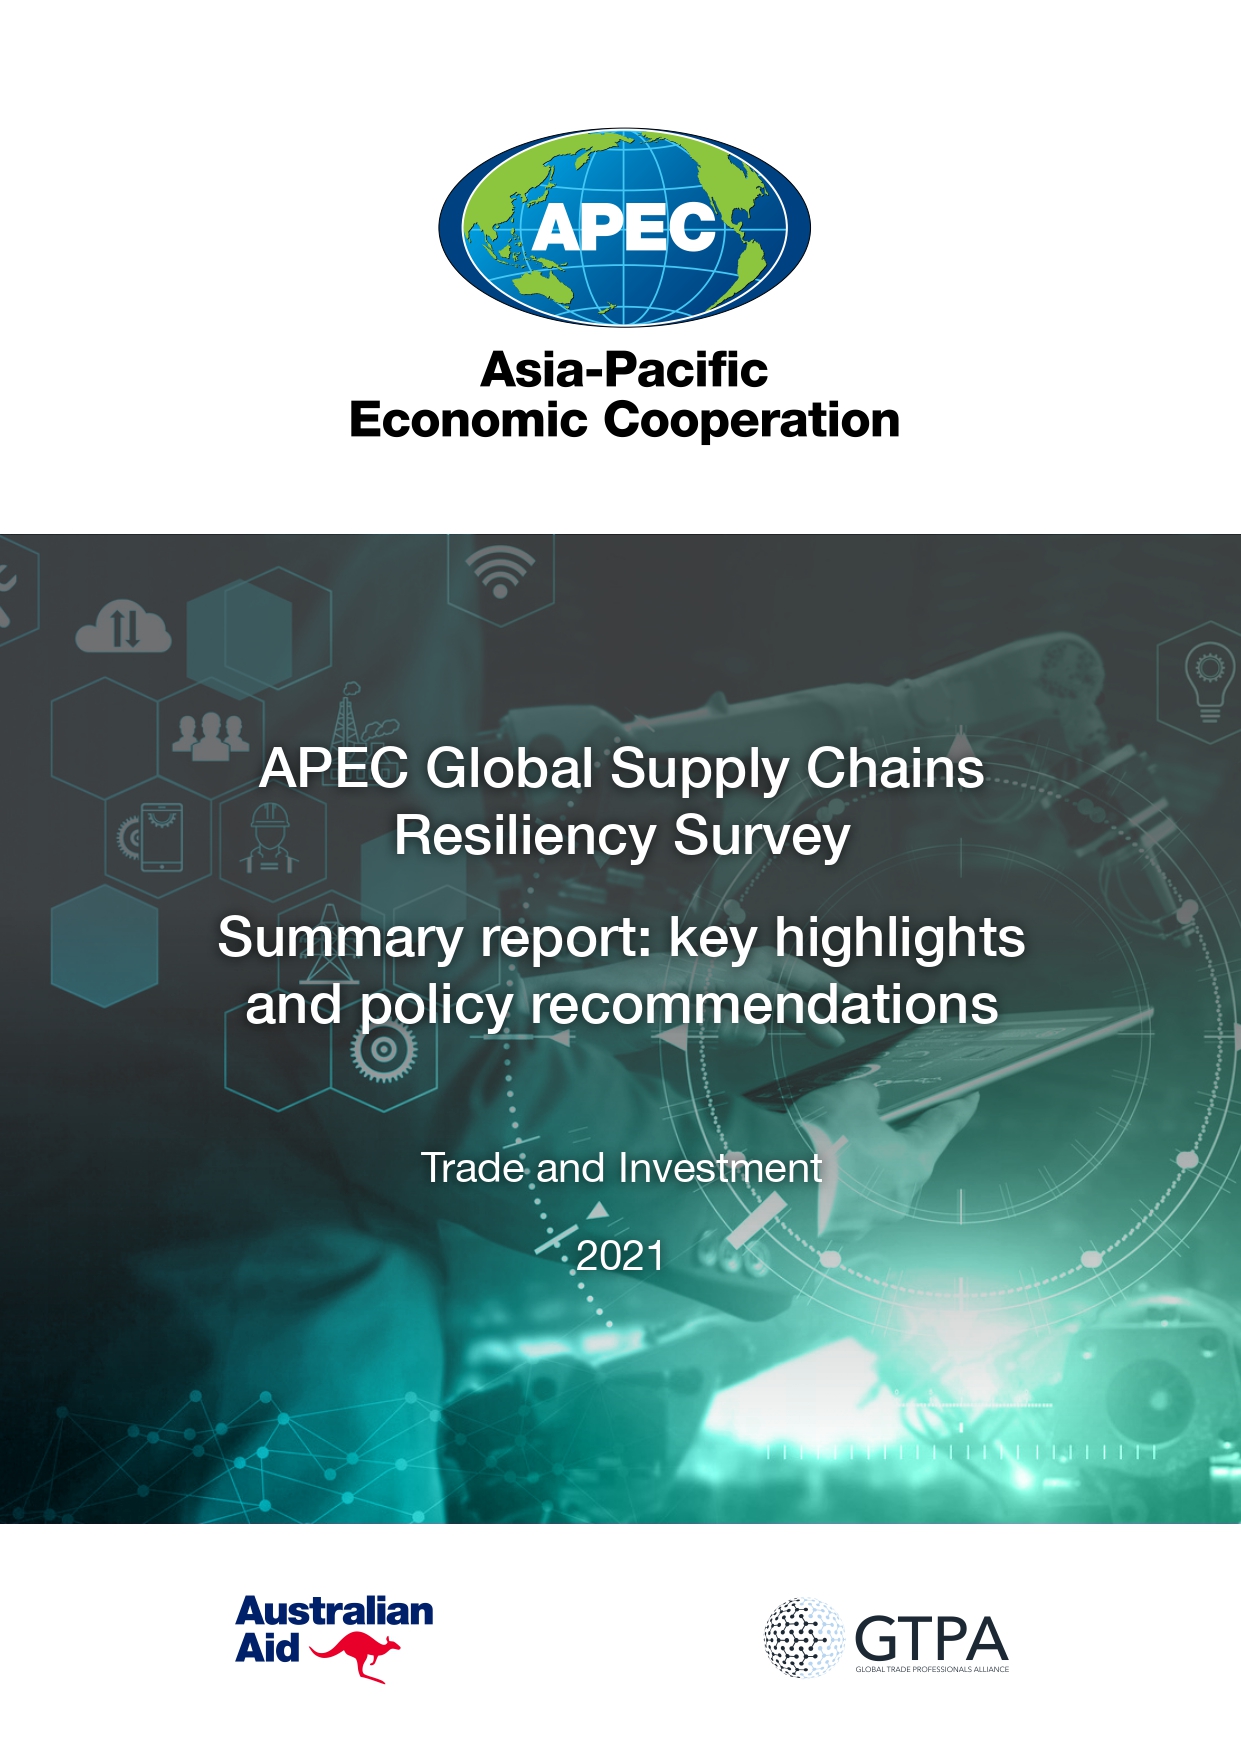 APEC Global Supply Chains highlights report